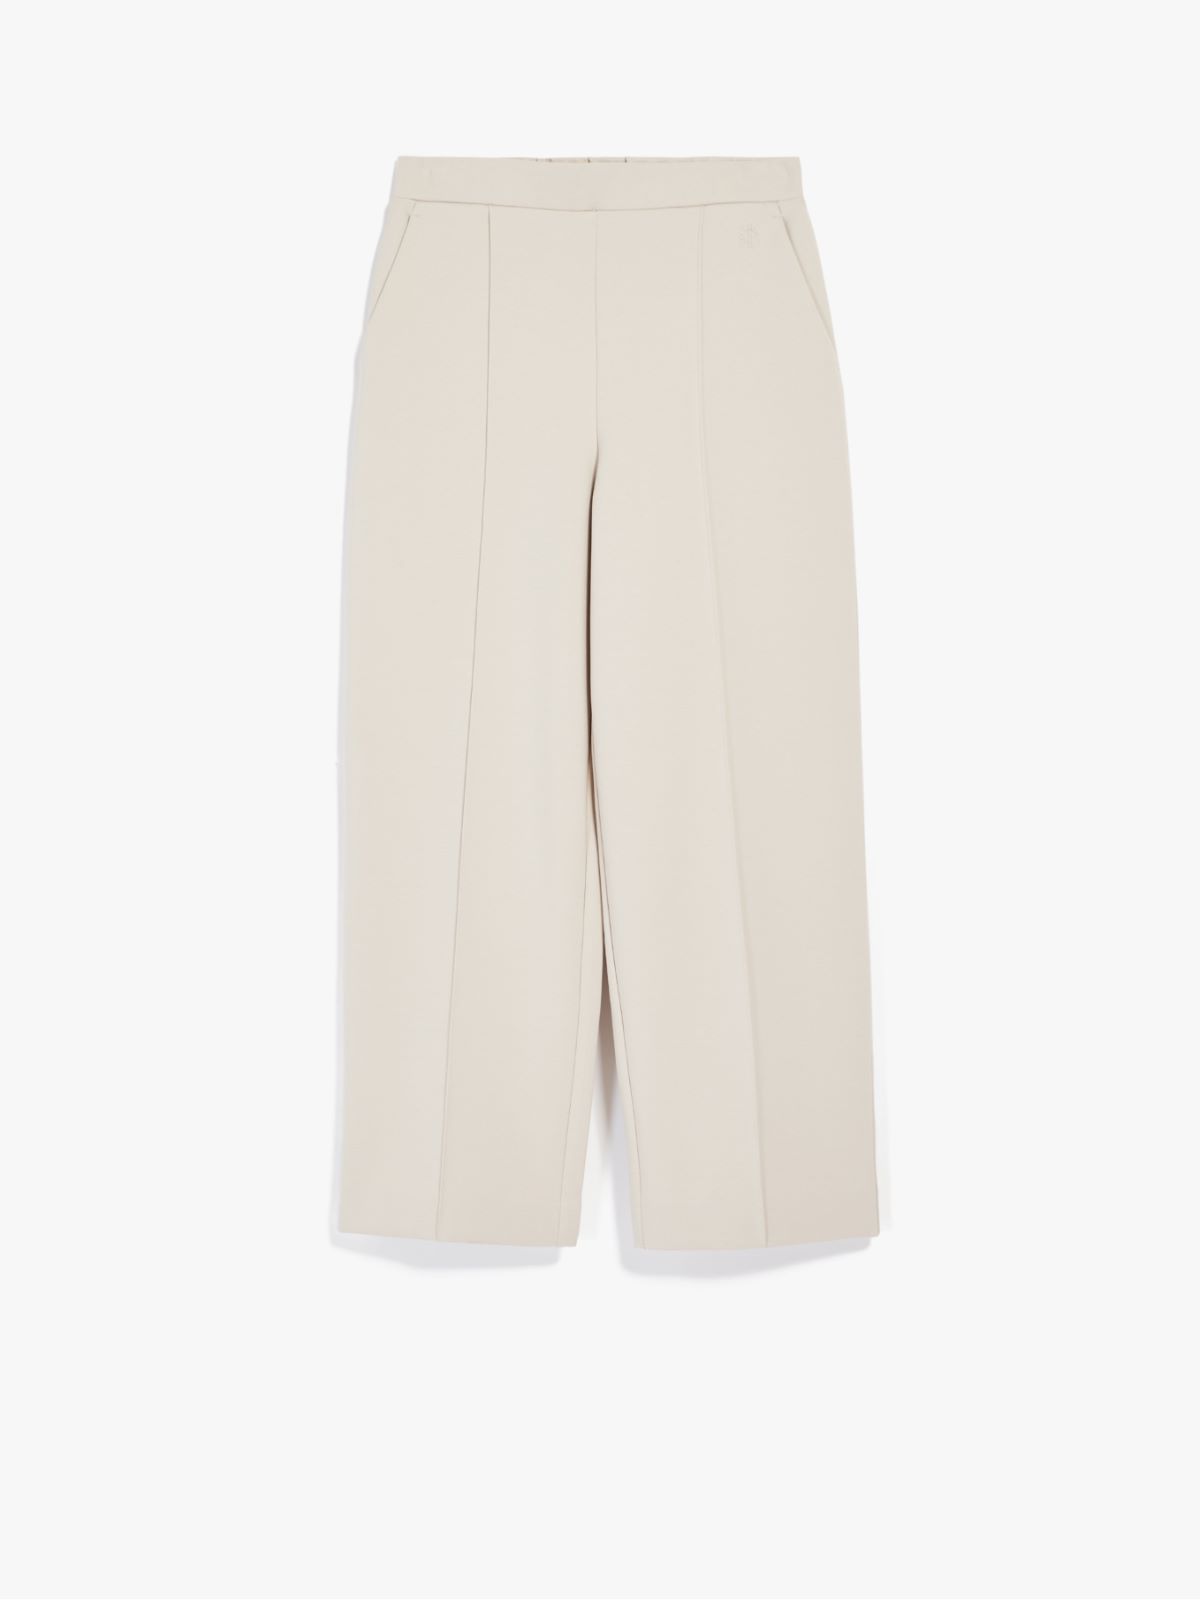 Jersey trousers - SAND - Weekend Max Mara - 5